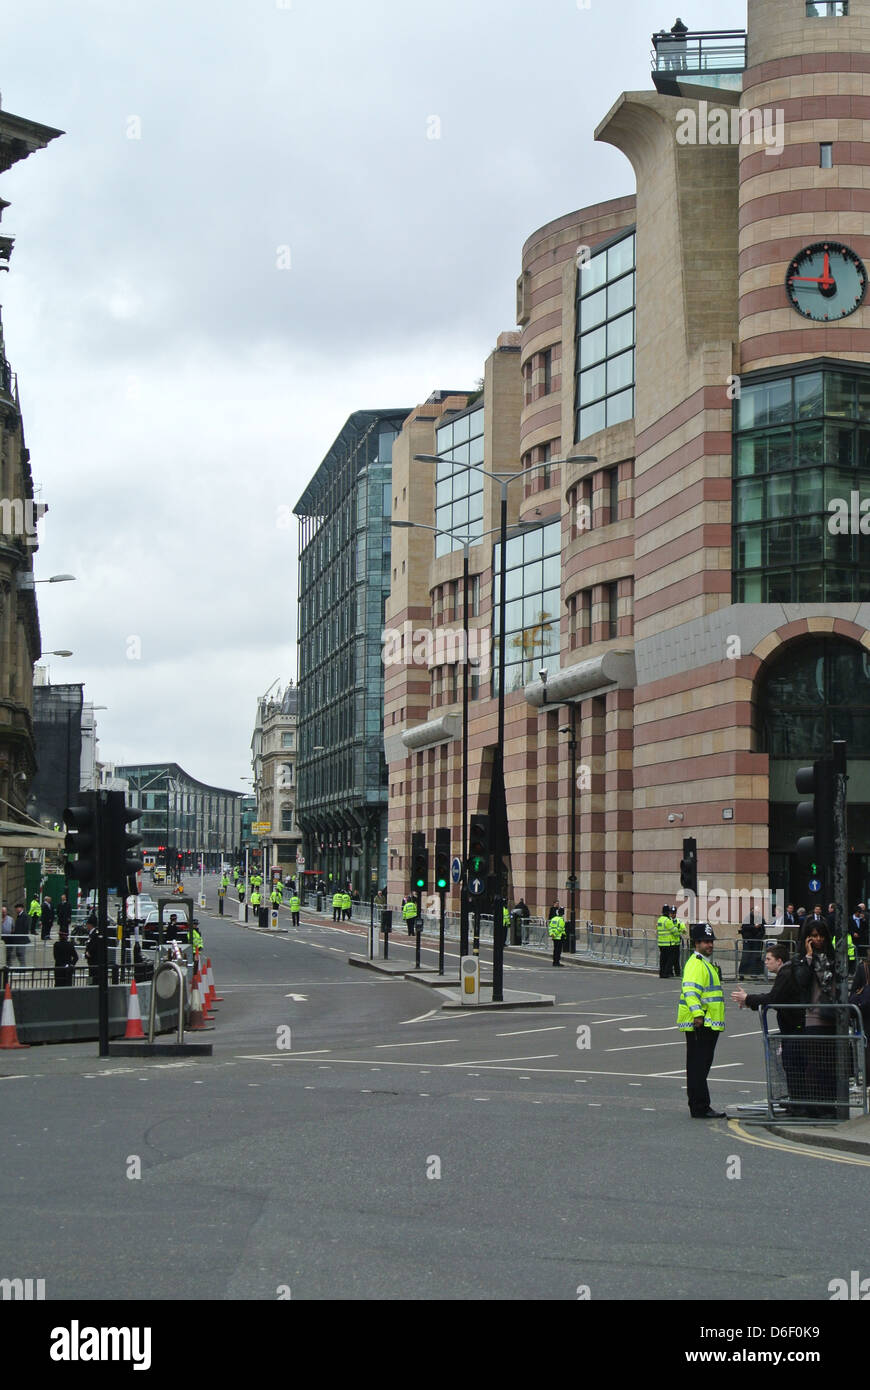 Empty roads, no traffic, cars, buses. Day of Margaret Thatchers funeral. Line of police. Queen Victoria St, London. Stock Photo